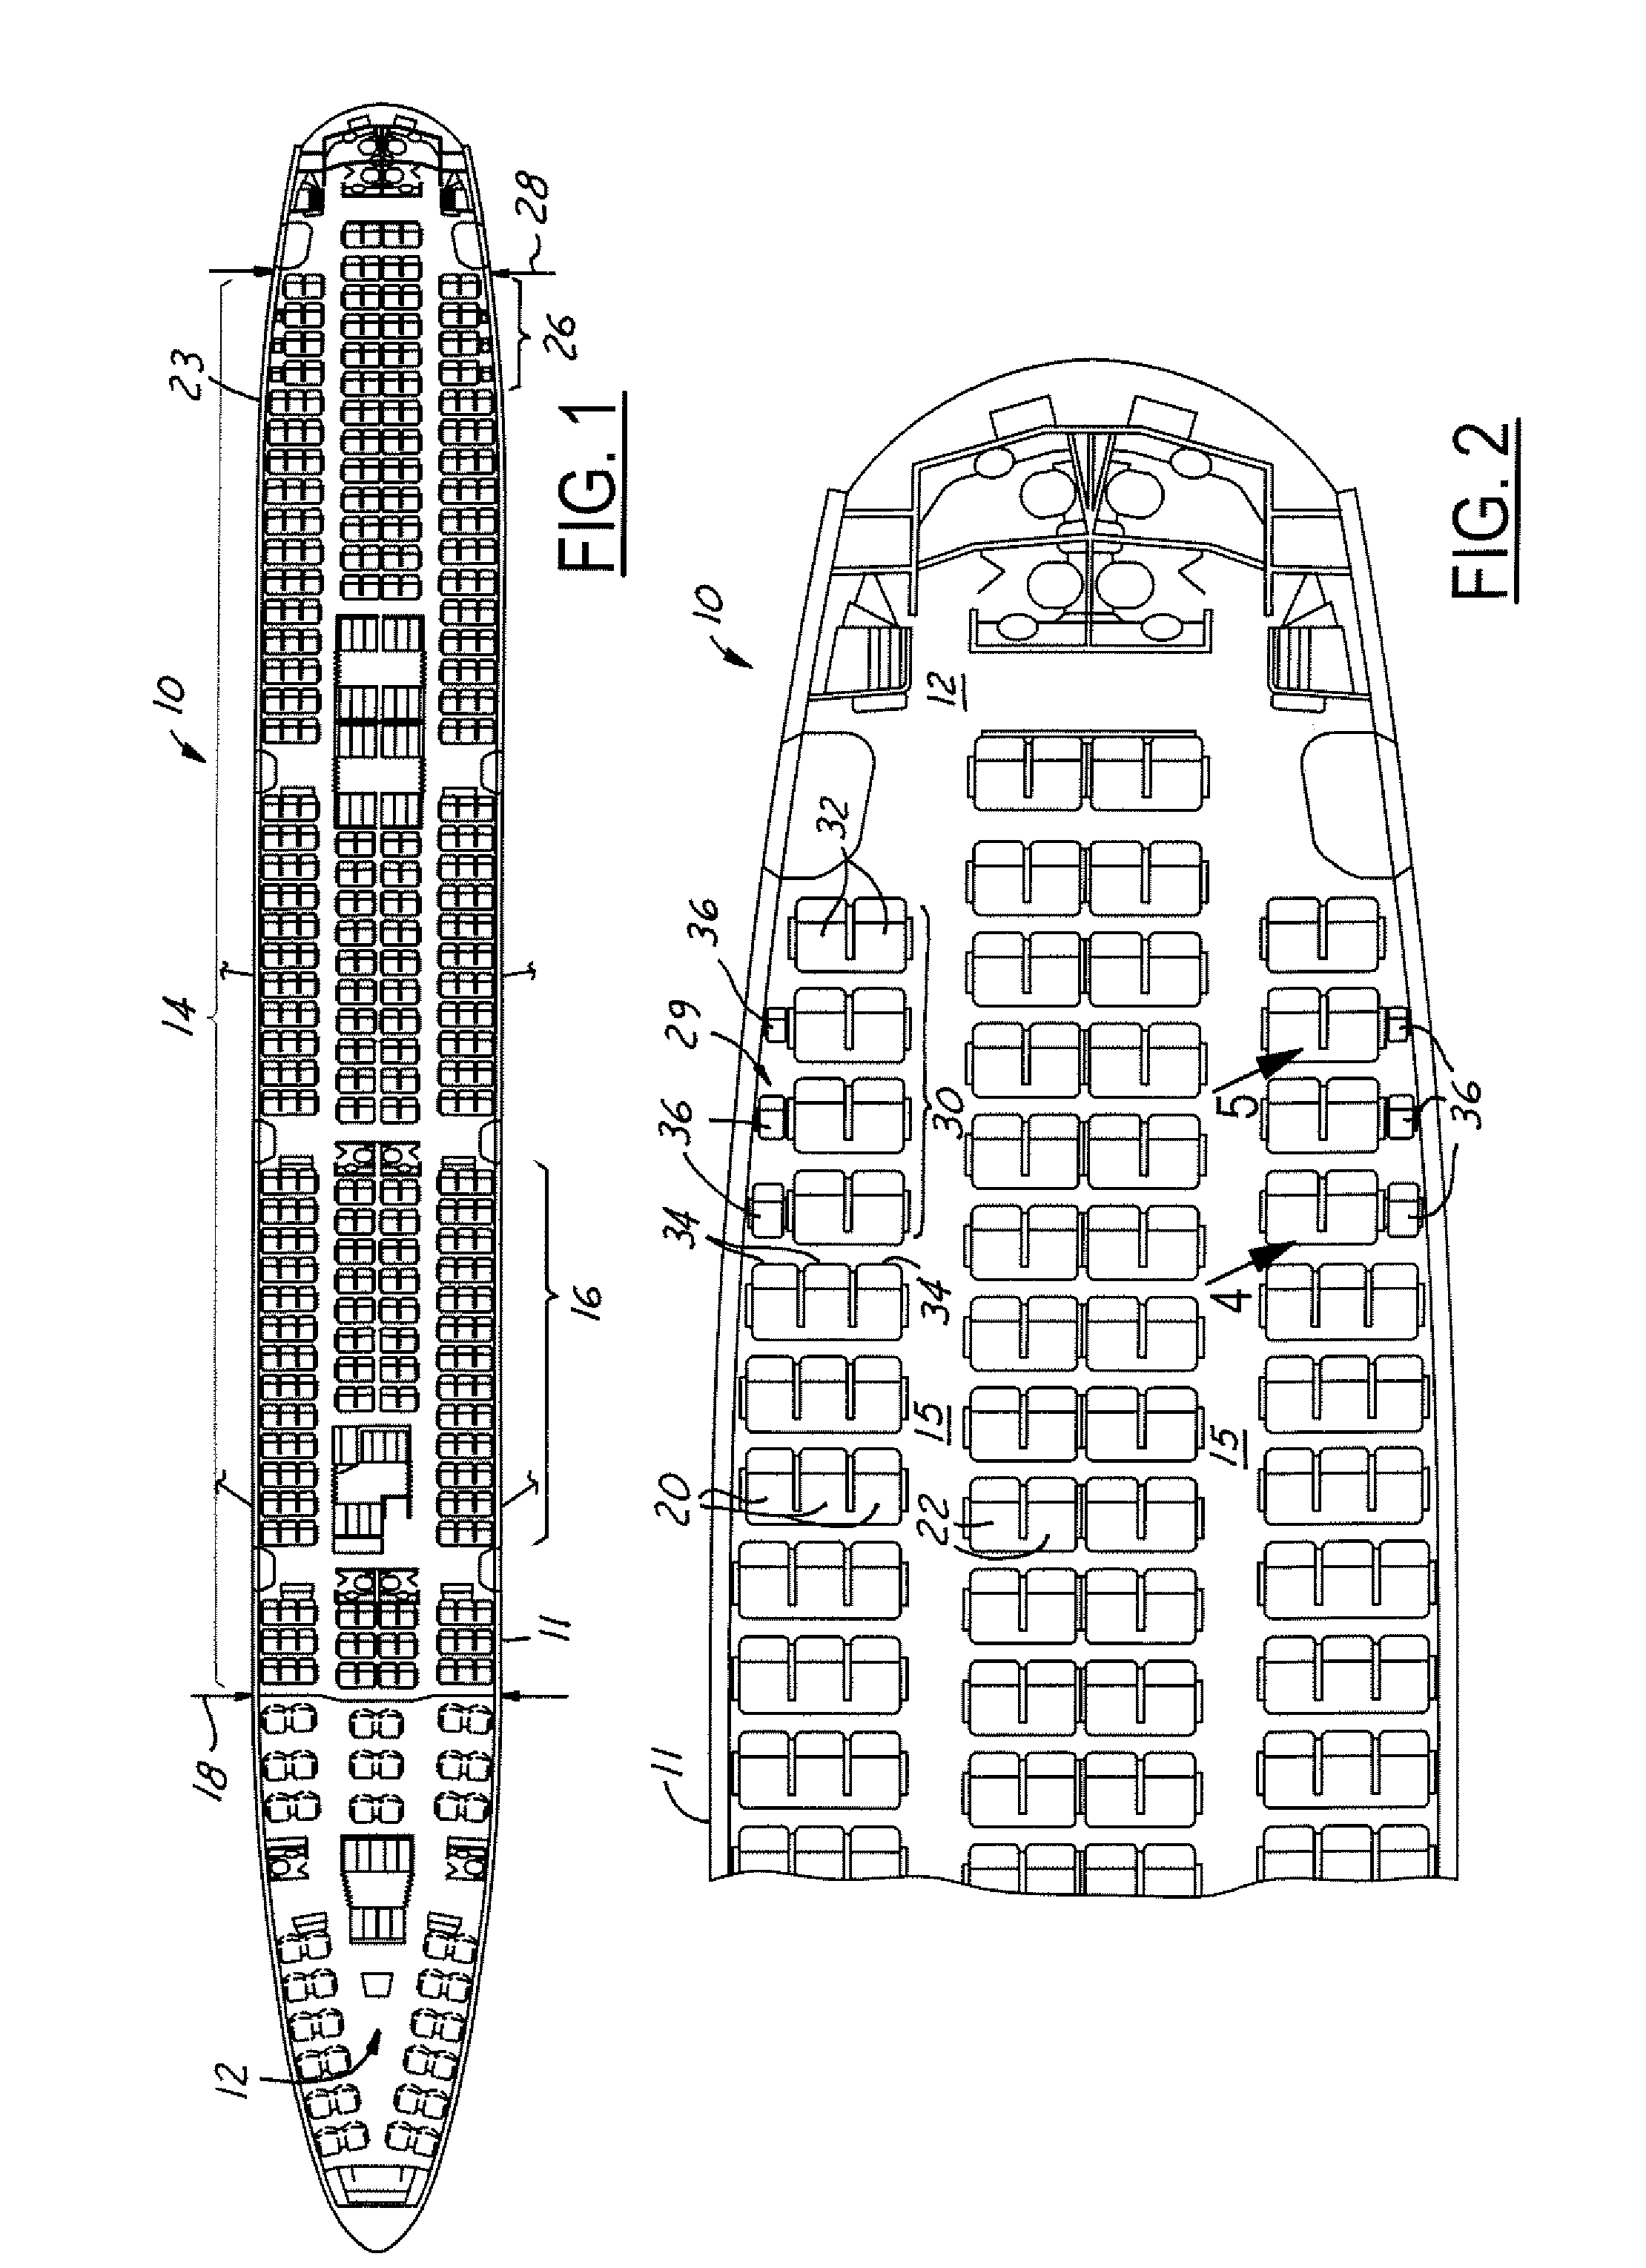 Aircraft youth seat/family seating arrangement